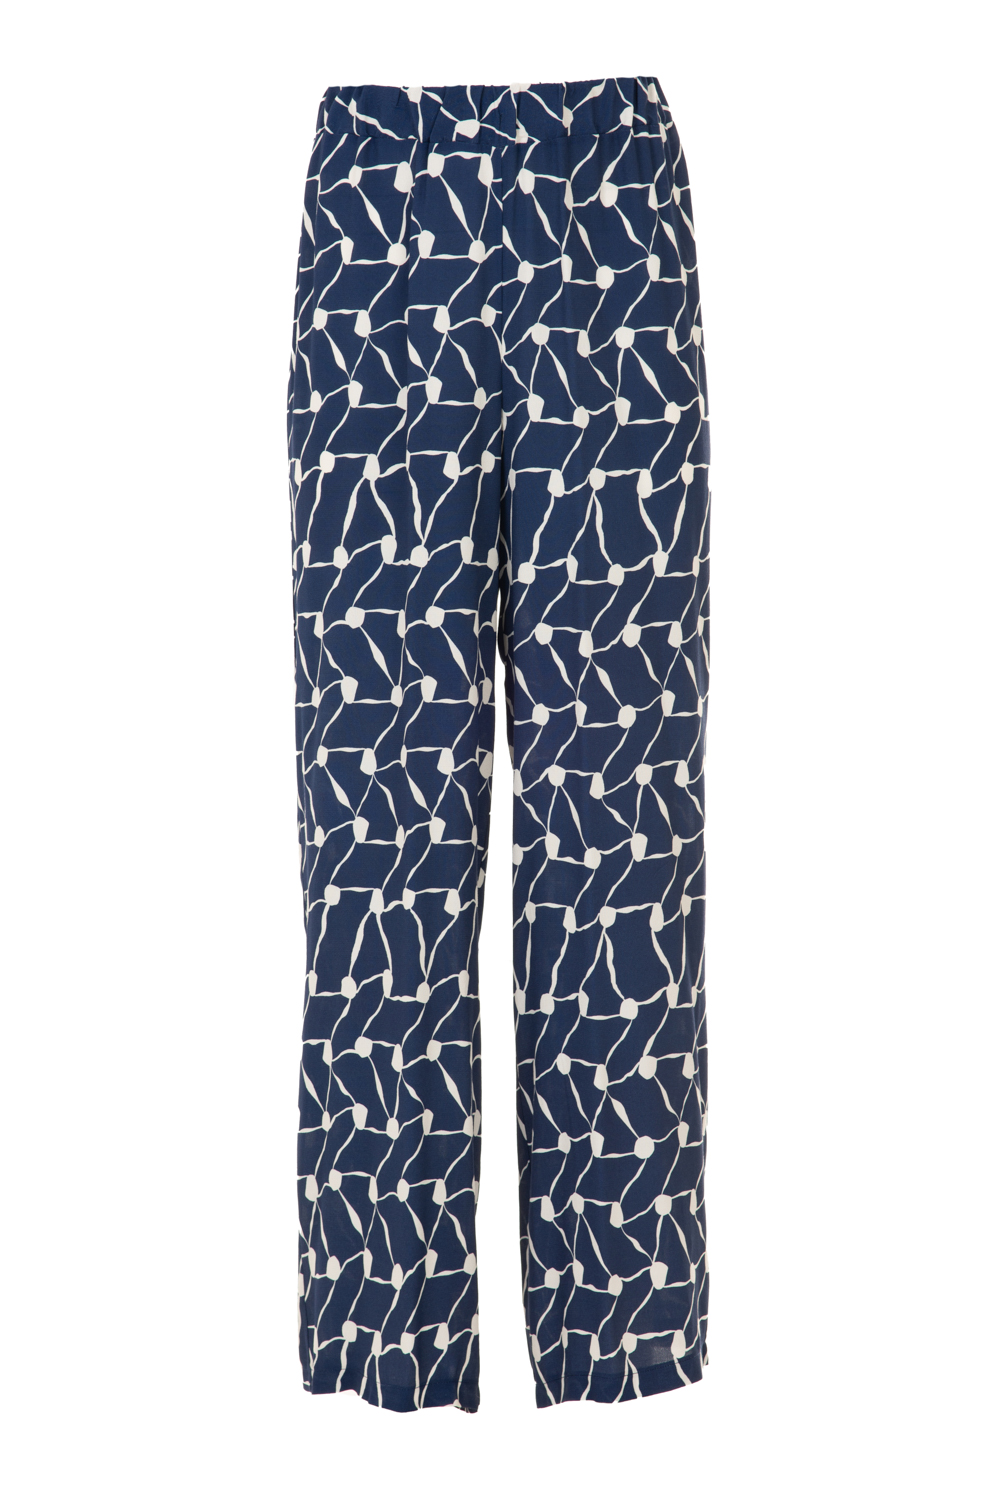 Viscose Printed Wide Legged Trousers with Elasticated Waistband